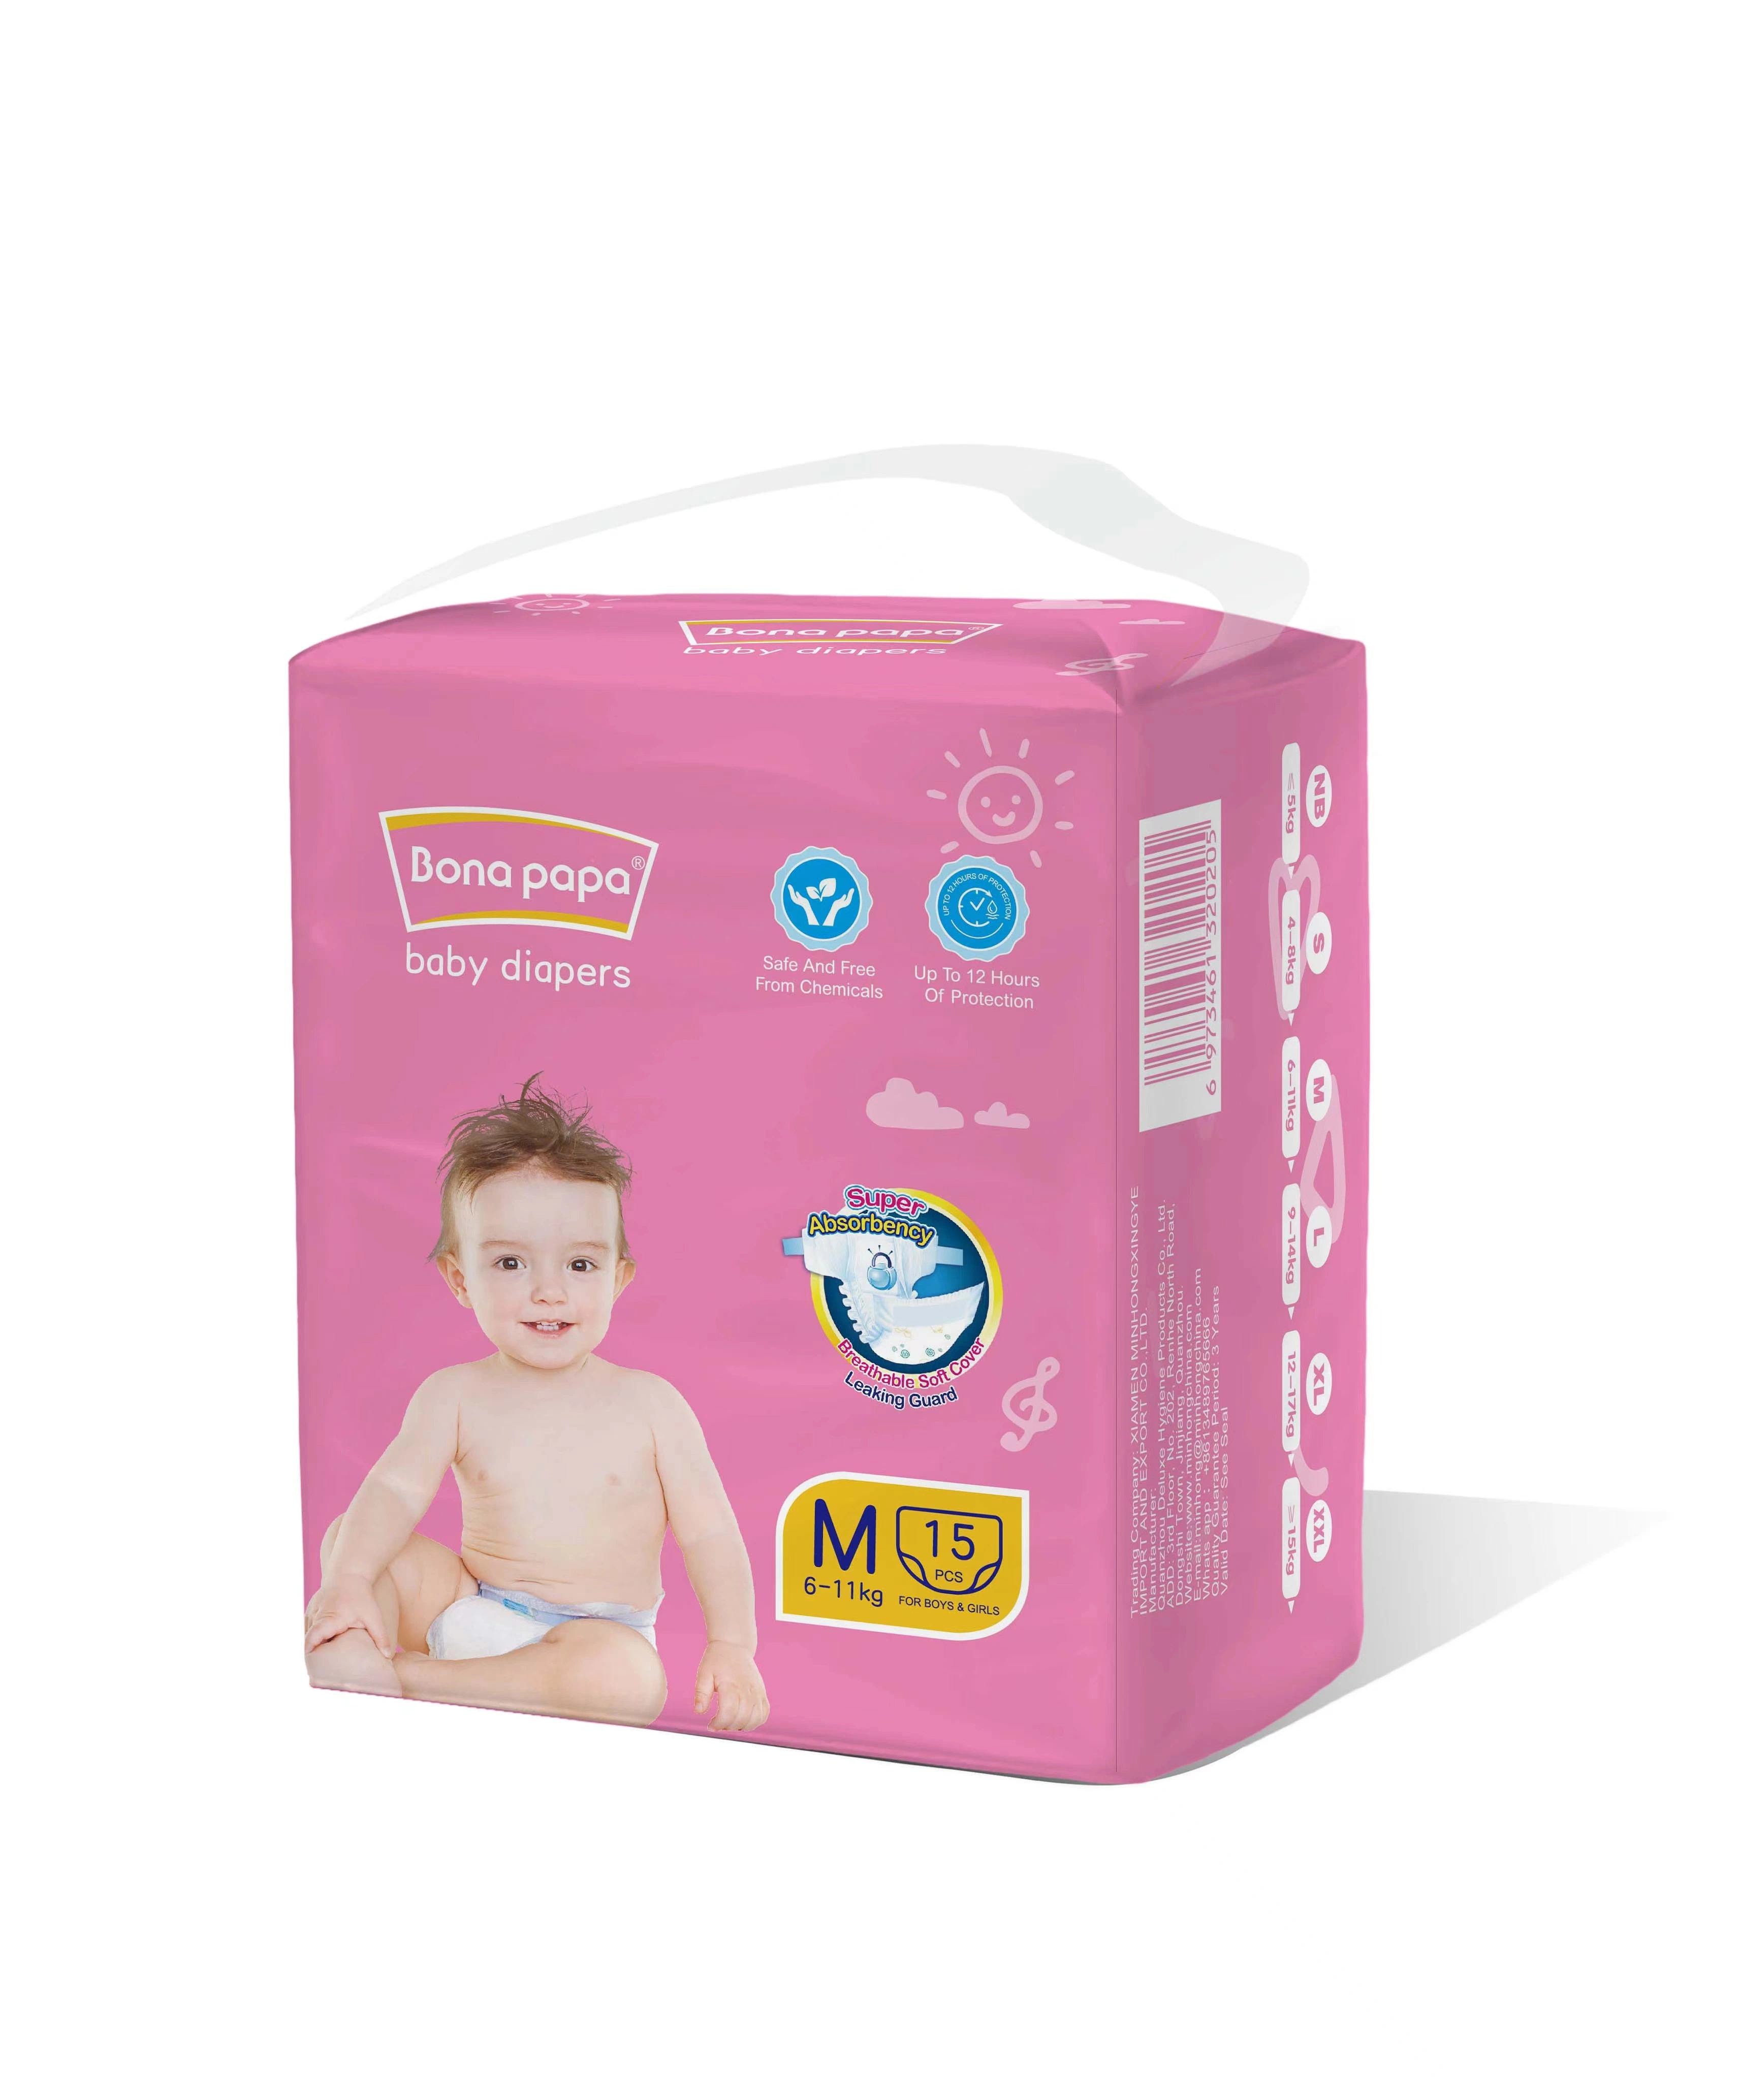 Hot Selling Wholesale Premium Quality Ultra Soft High Absorption Cheap Price Breathable Care Baby Comfortable Diaper Nappy Items Made in China